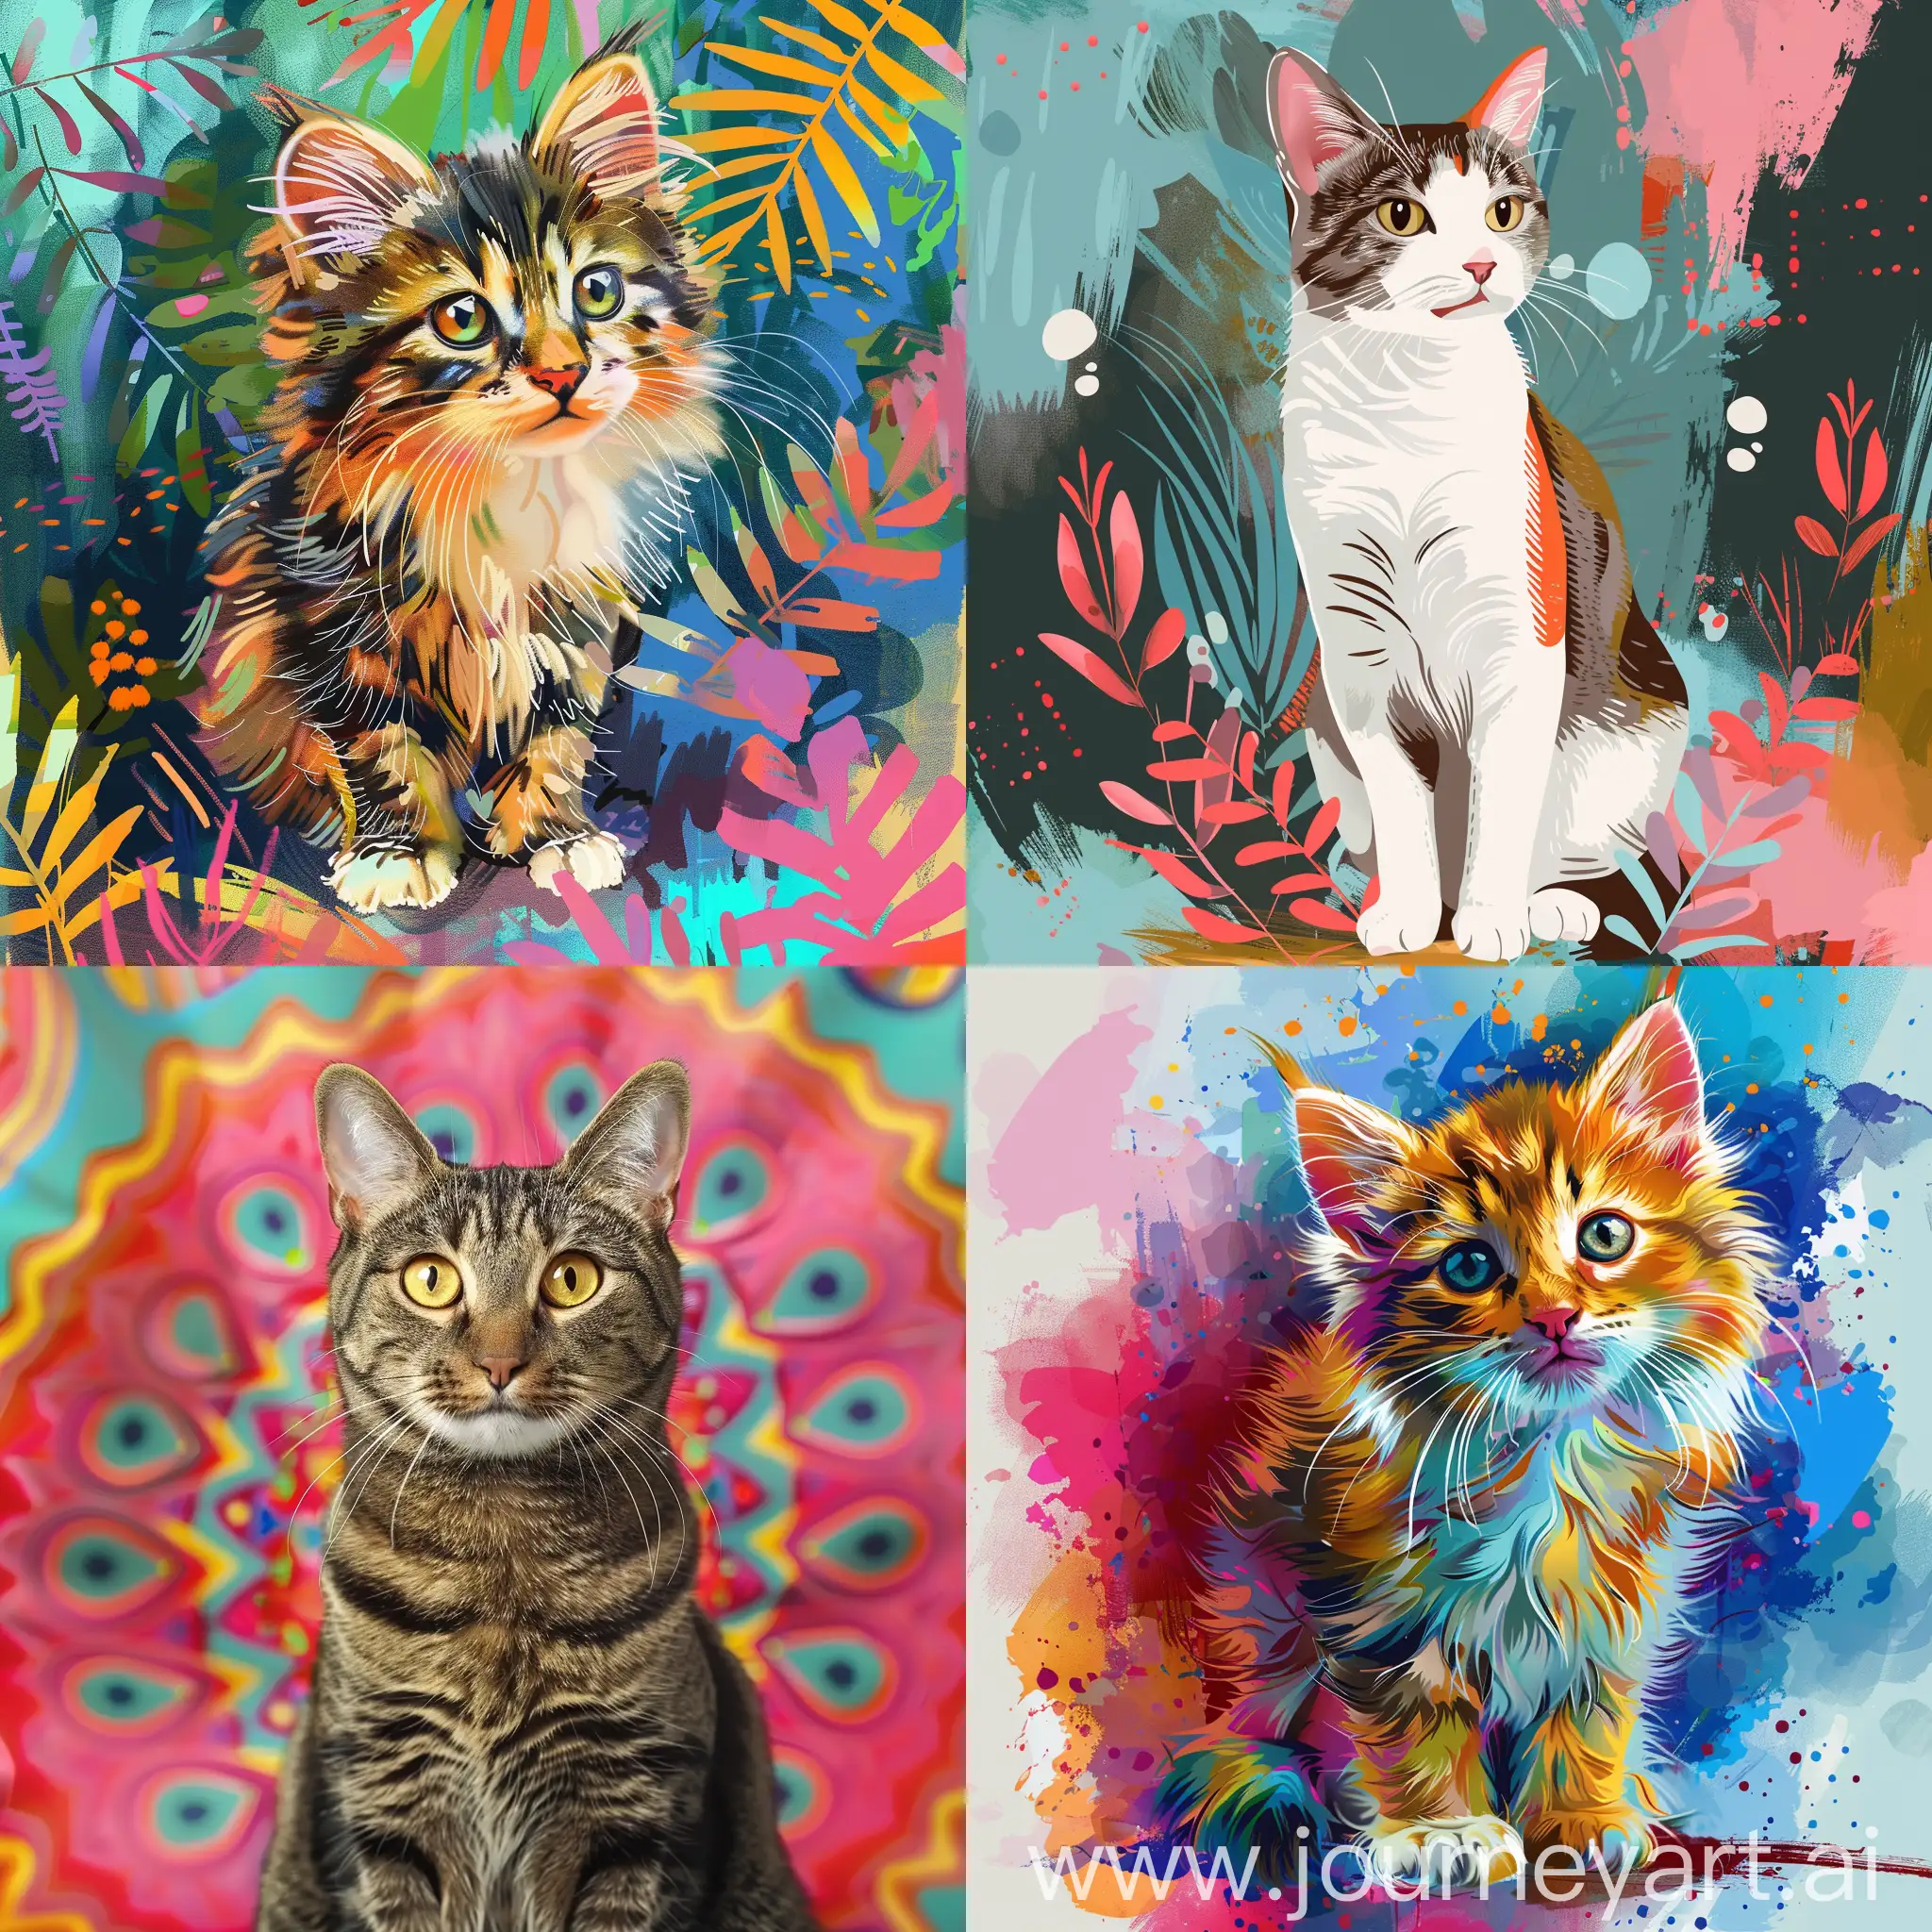 Cute cat with colourful background and colourful compositions 